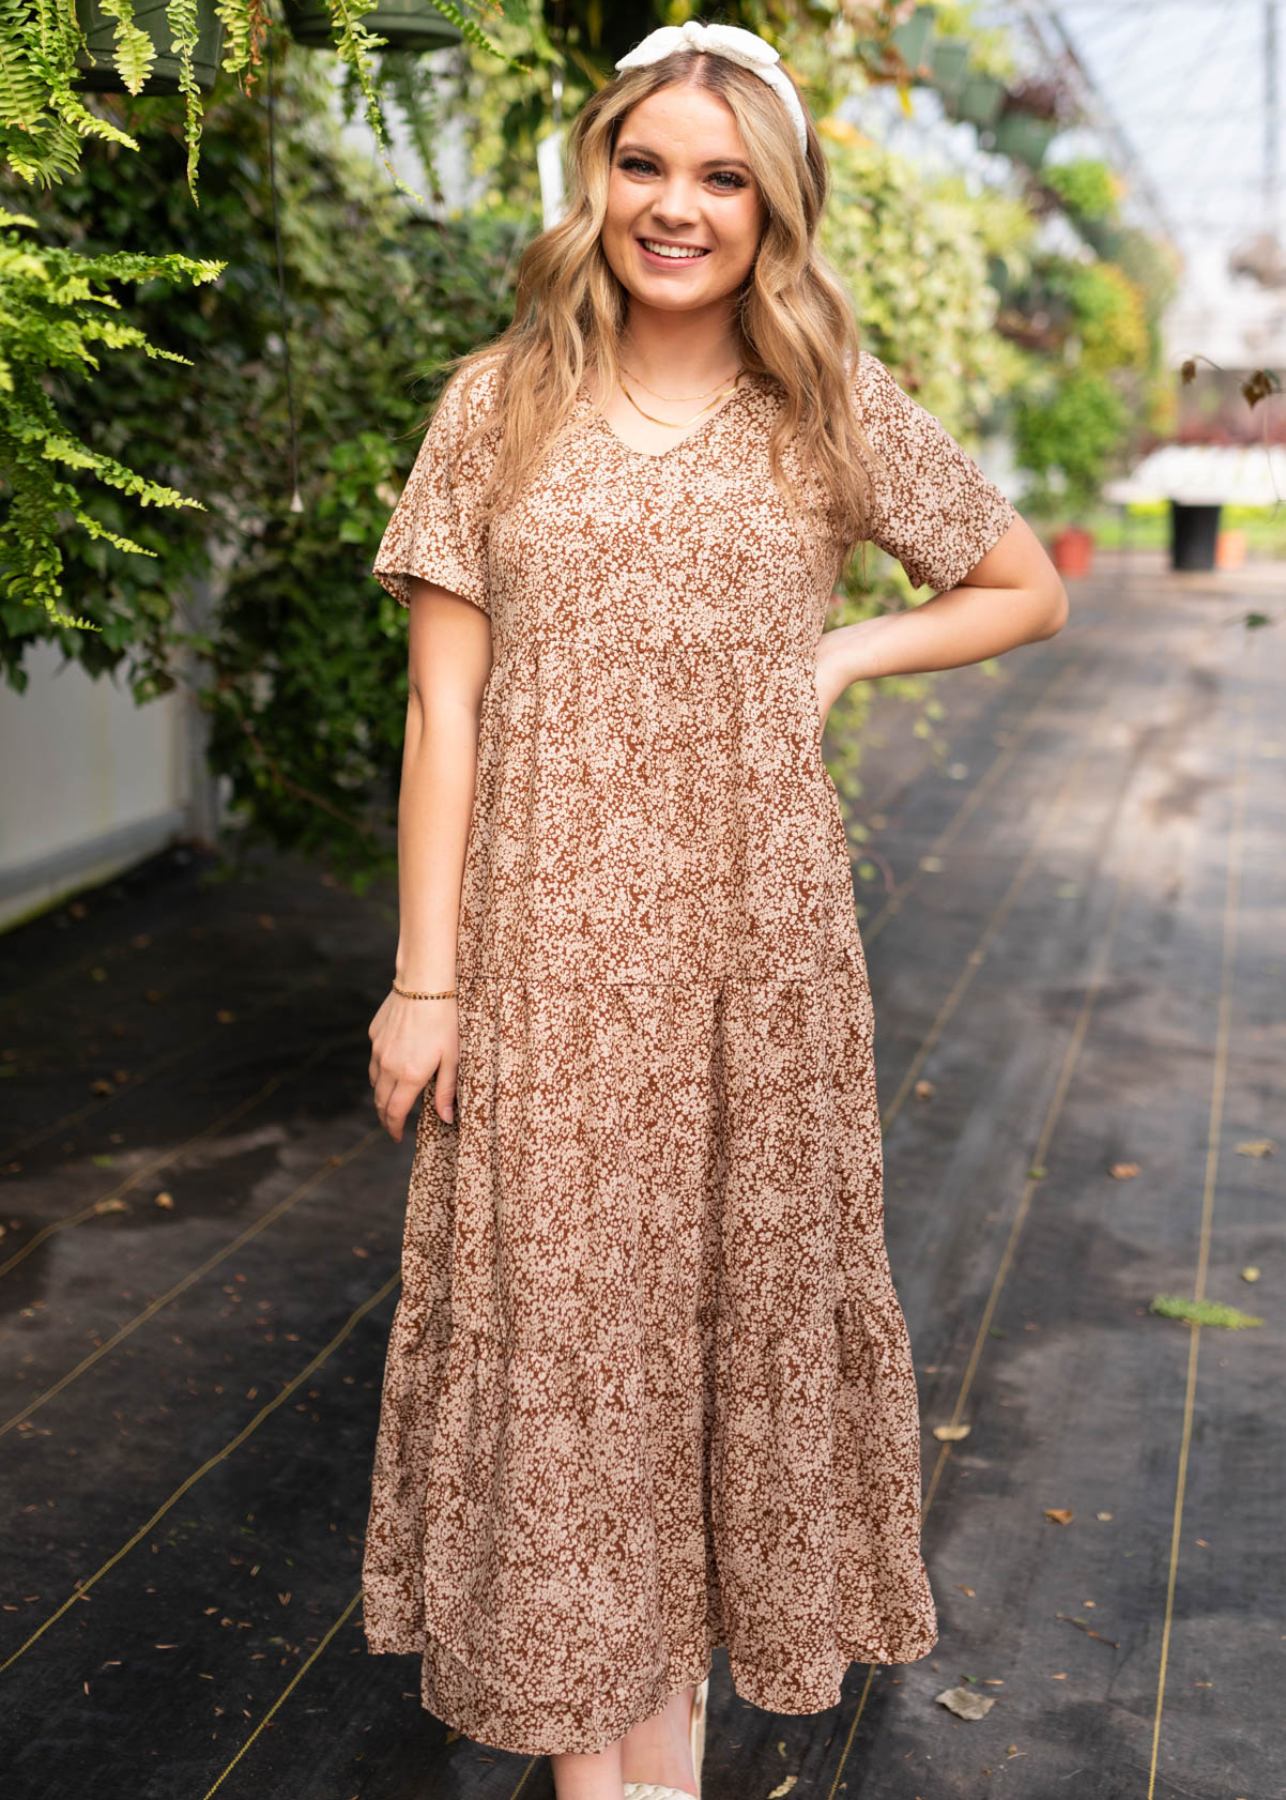 Brown floral dress with tiered skirt